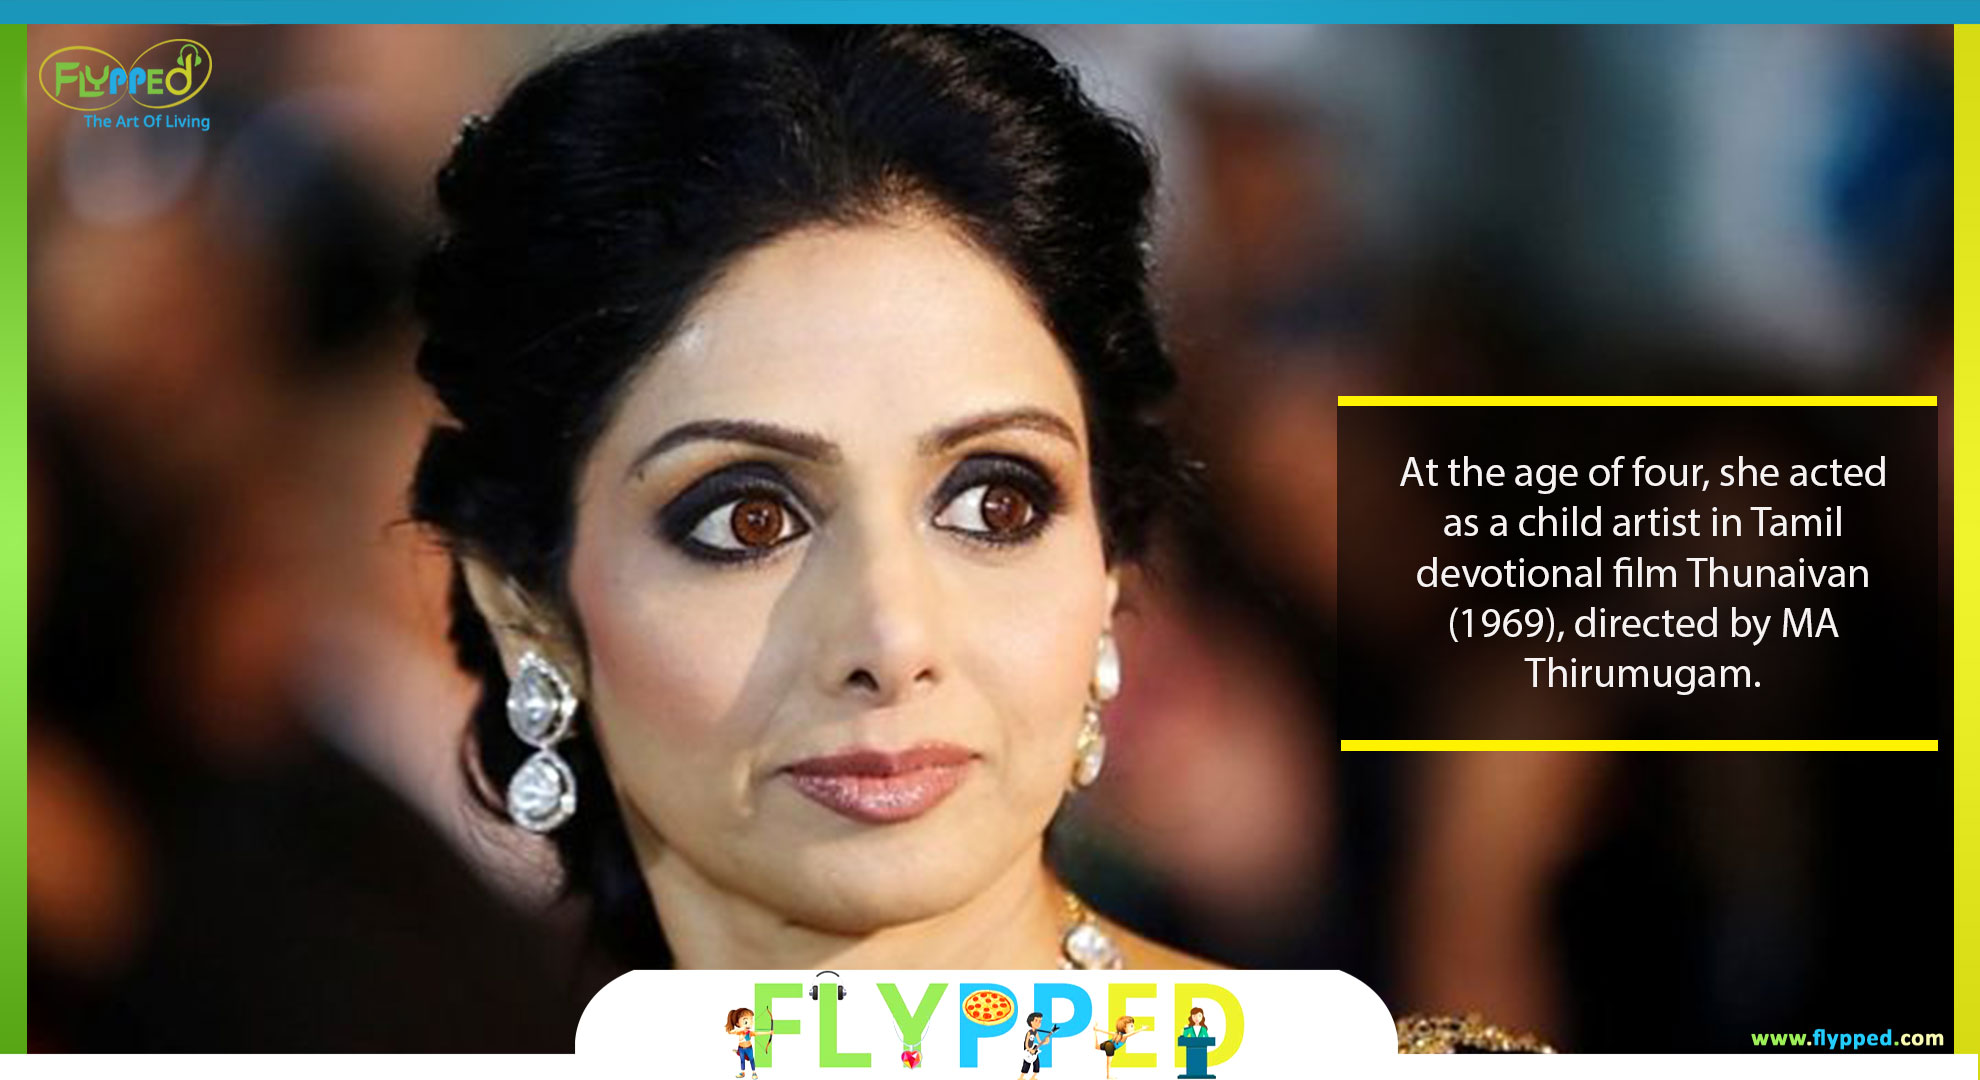 10-Interesting-facts-we-bet-you-didn't-know-about-Sridevi1